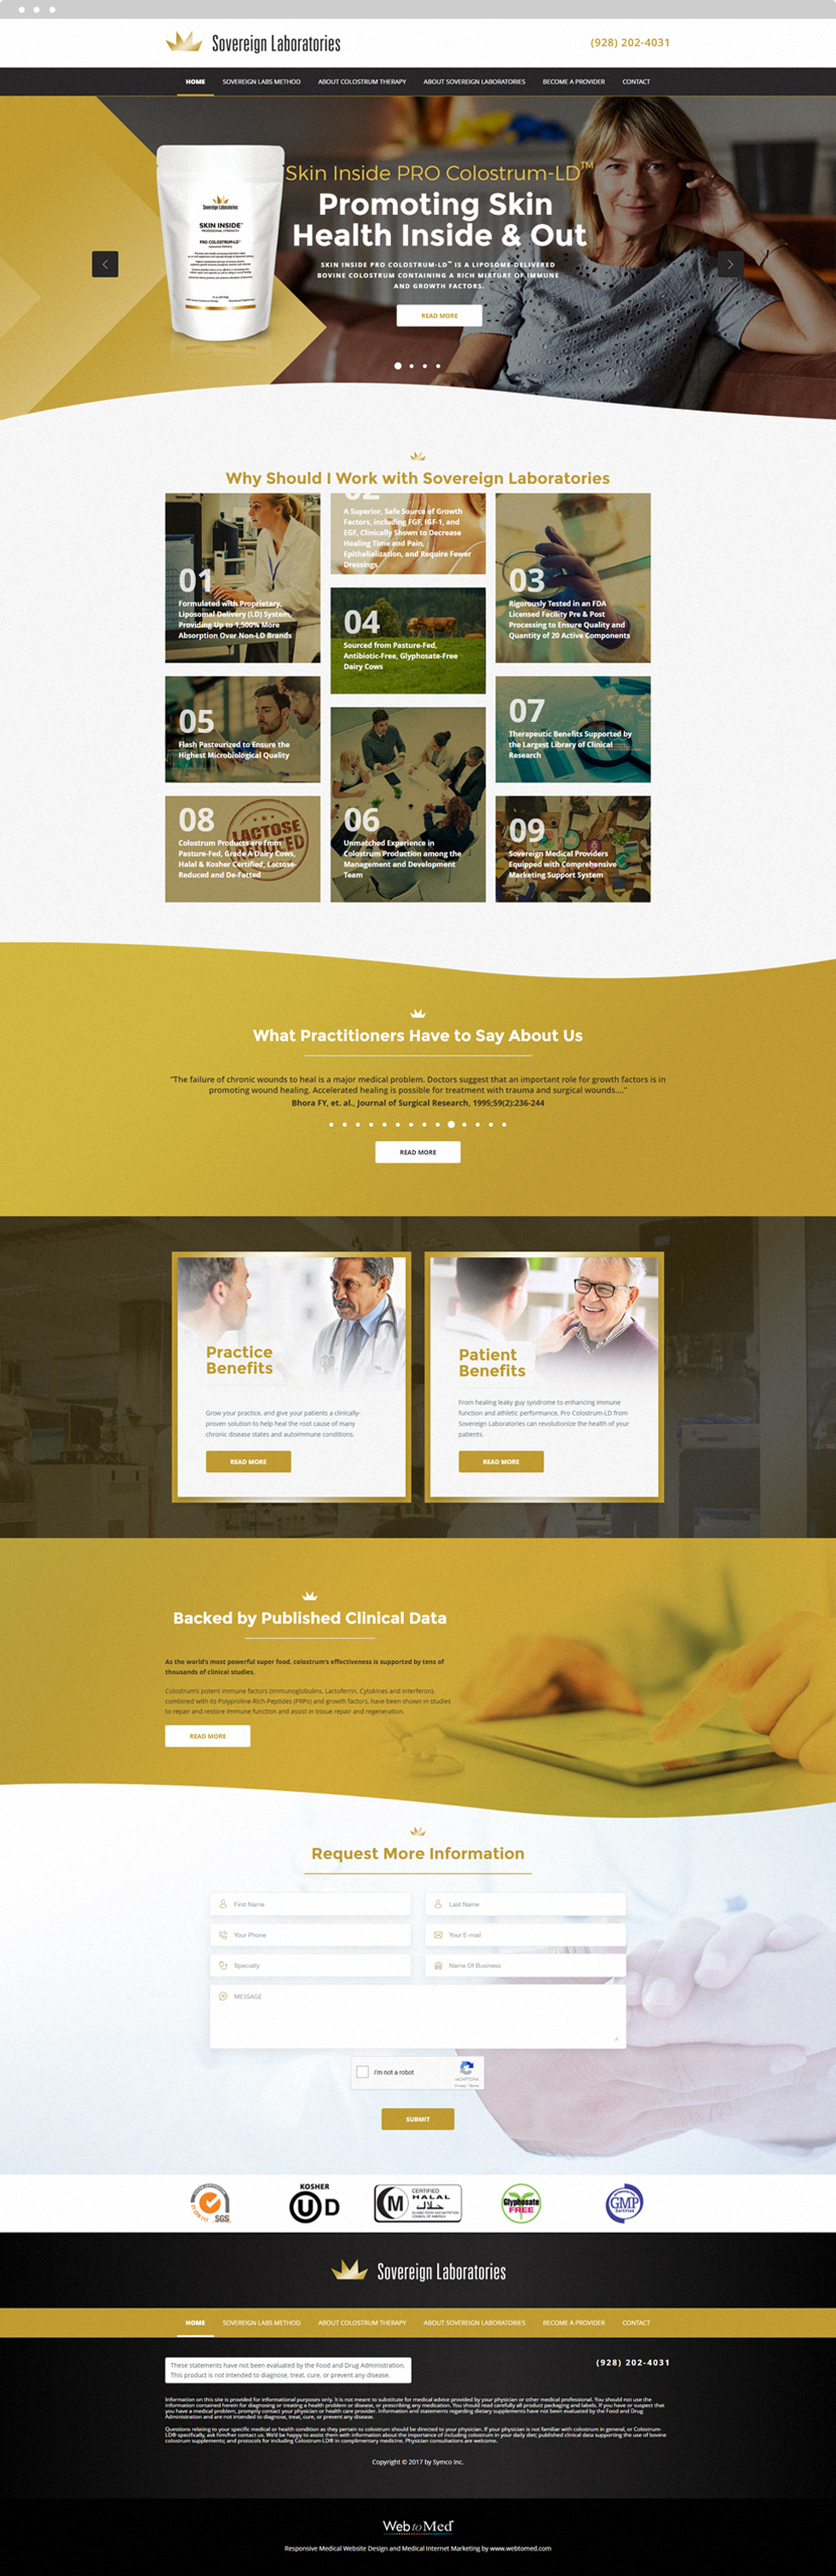 Medical Products Website Design - Sovereign Laboratories - Homepage